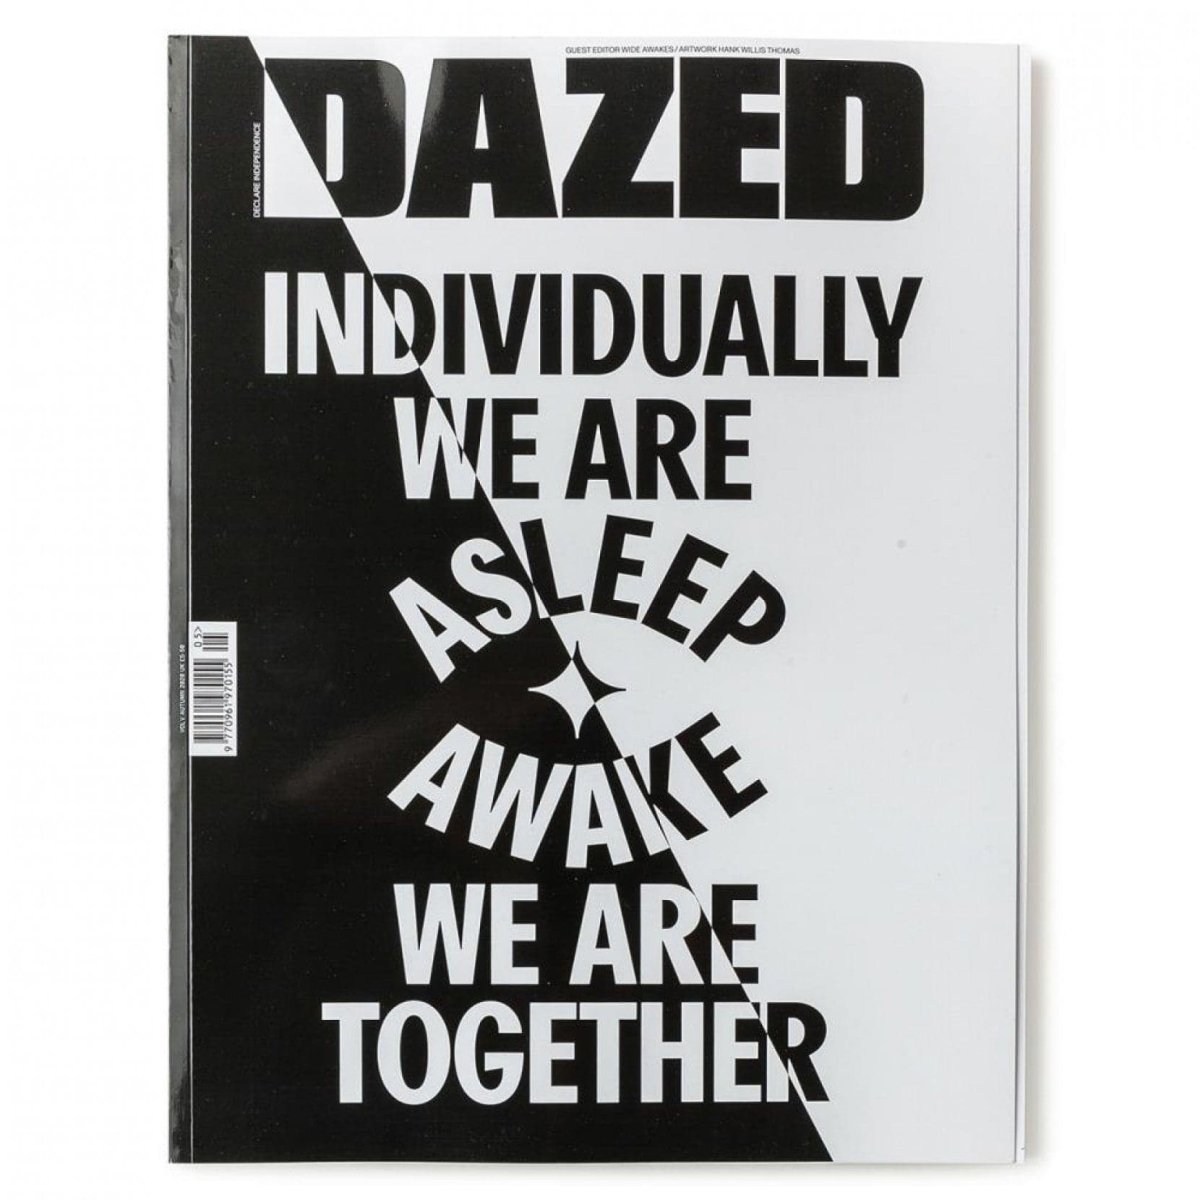 Dazed Autumn 2020 Issue: Read up Act Up Issue  - Allike Store